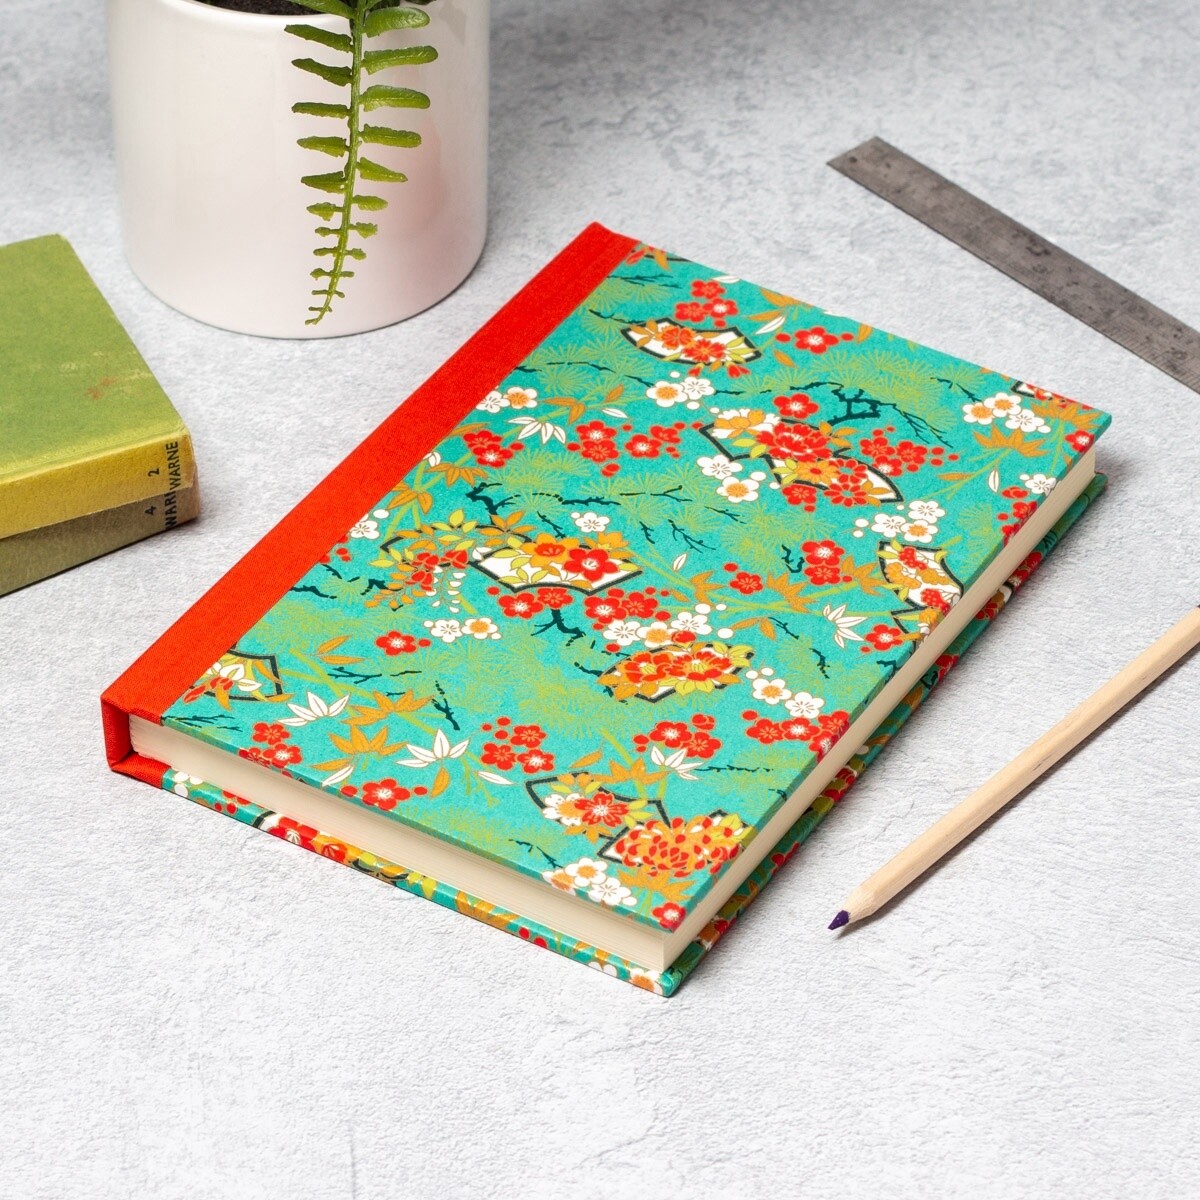 Classic Journal - A5 - Orange Blossom/Teal by Esmie